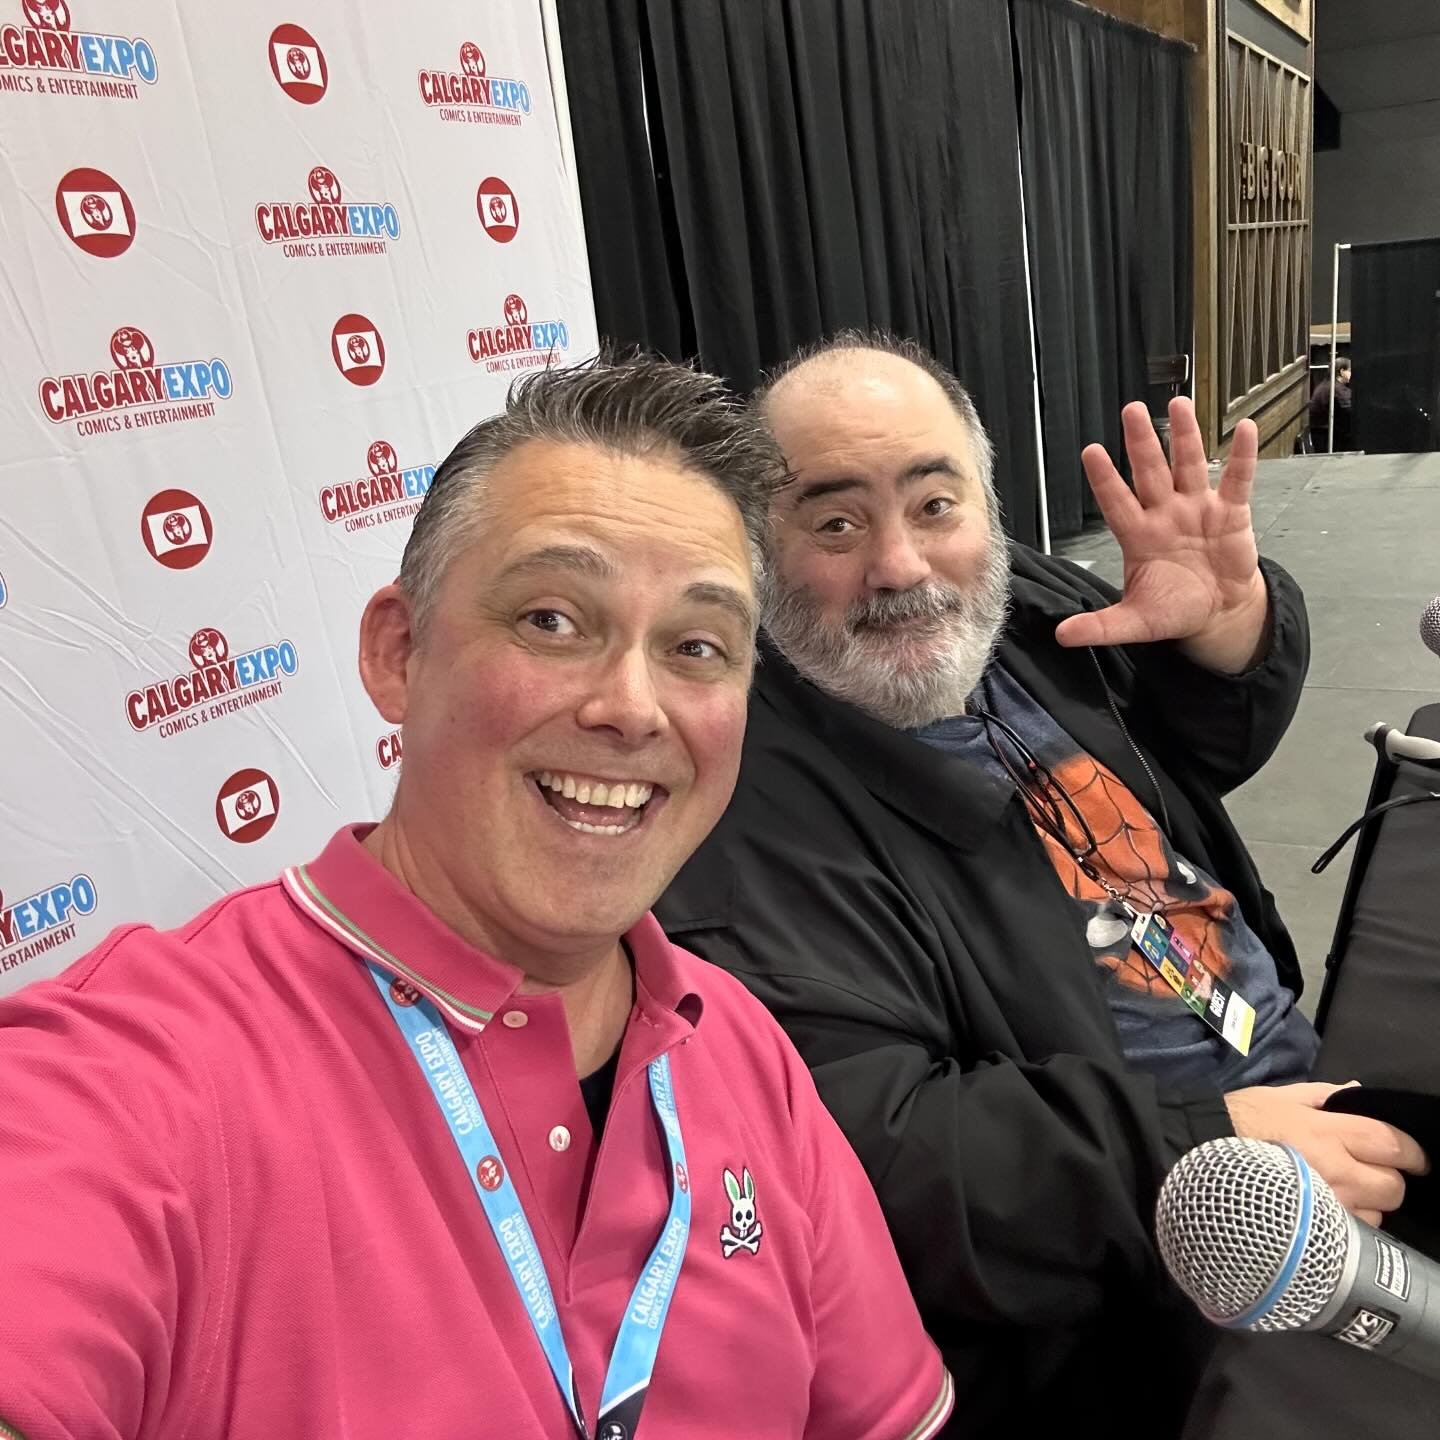 Just when I thought day 3 of @calgaryexpo couldn&rsquo;t get any better, and completely unexpectedI, I was asked to moderate the creator spotlight on one of my favourite writers, Dan Slott!!Thank you, @kevthemev77. 
#ComicsChat #ConventionLife